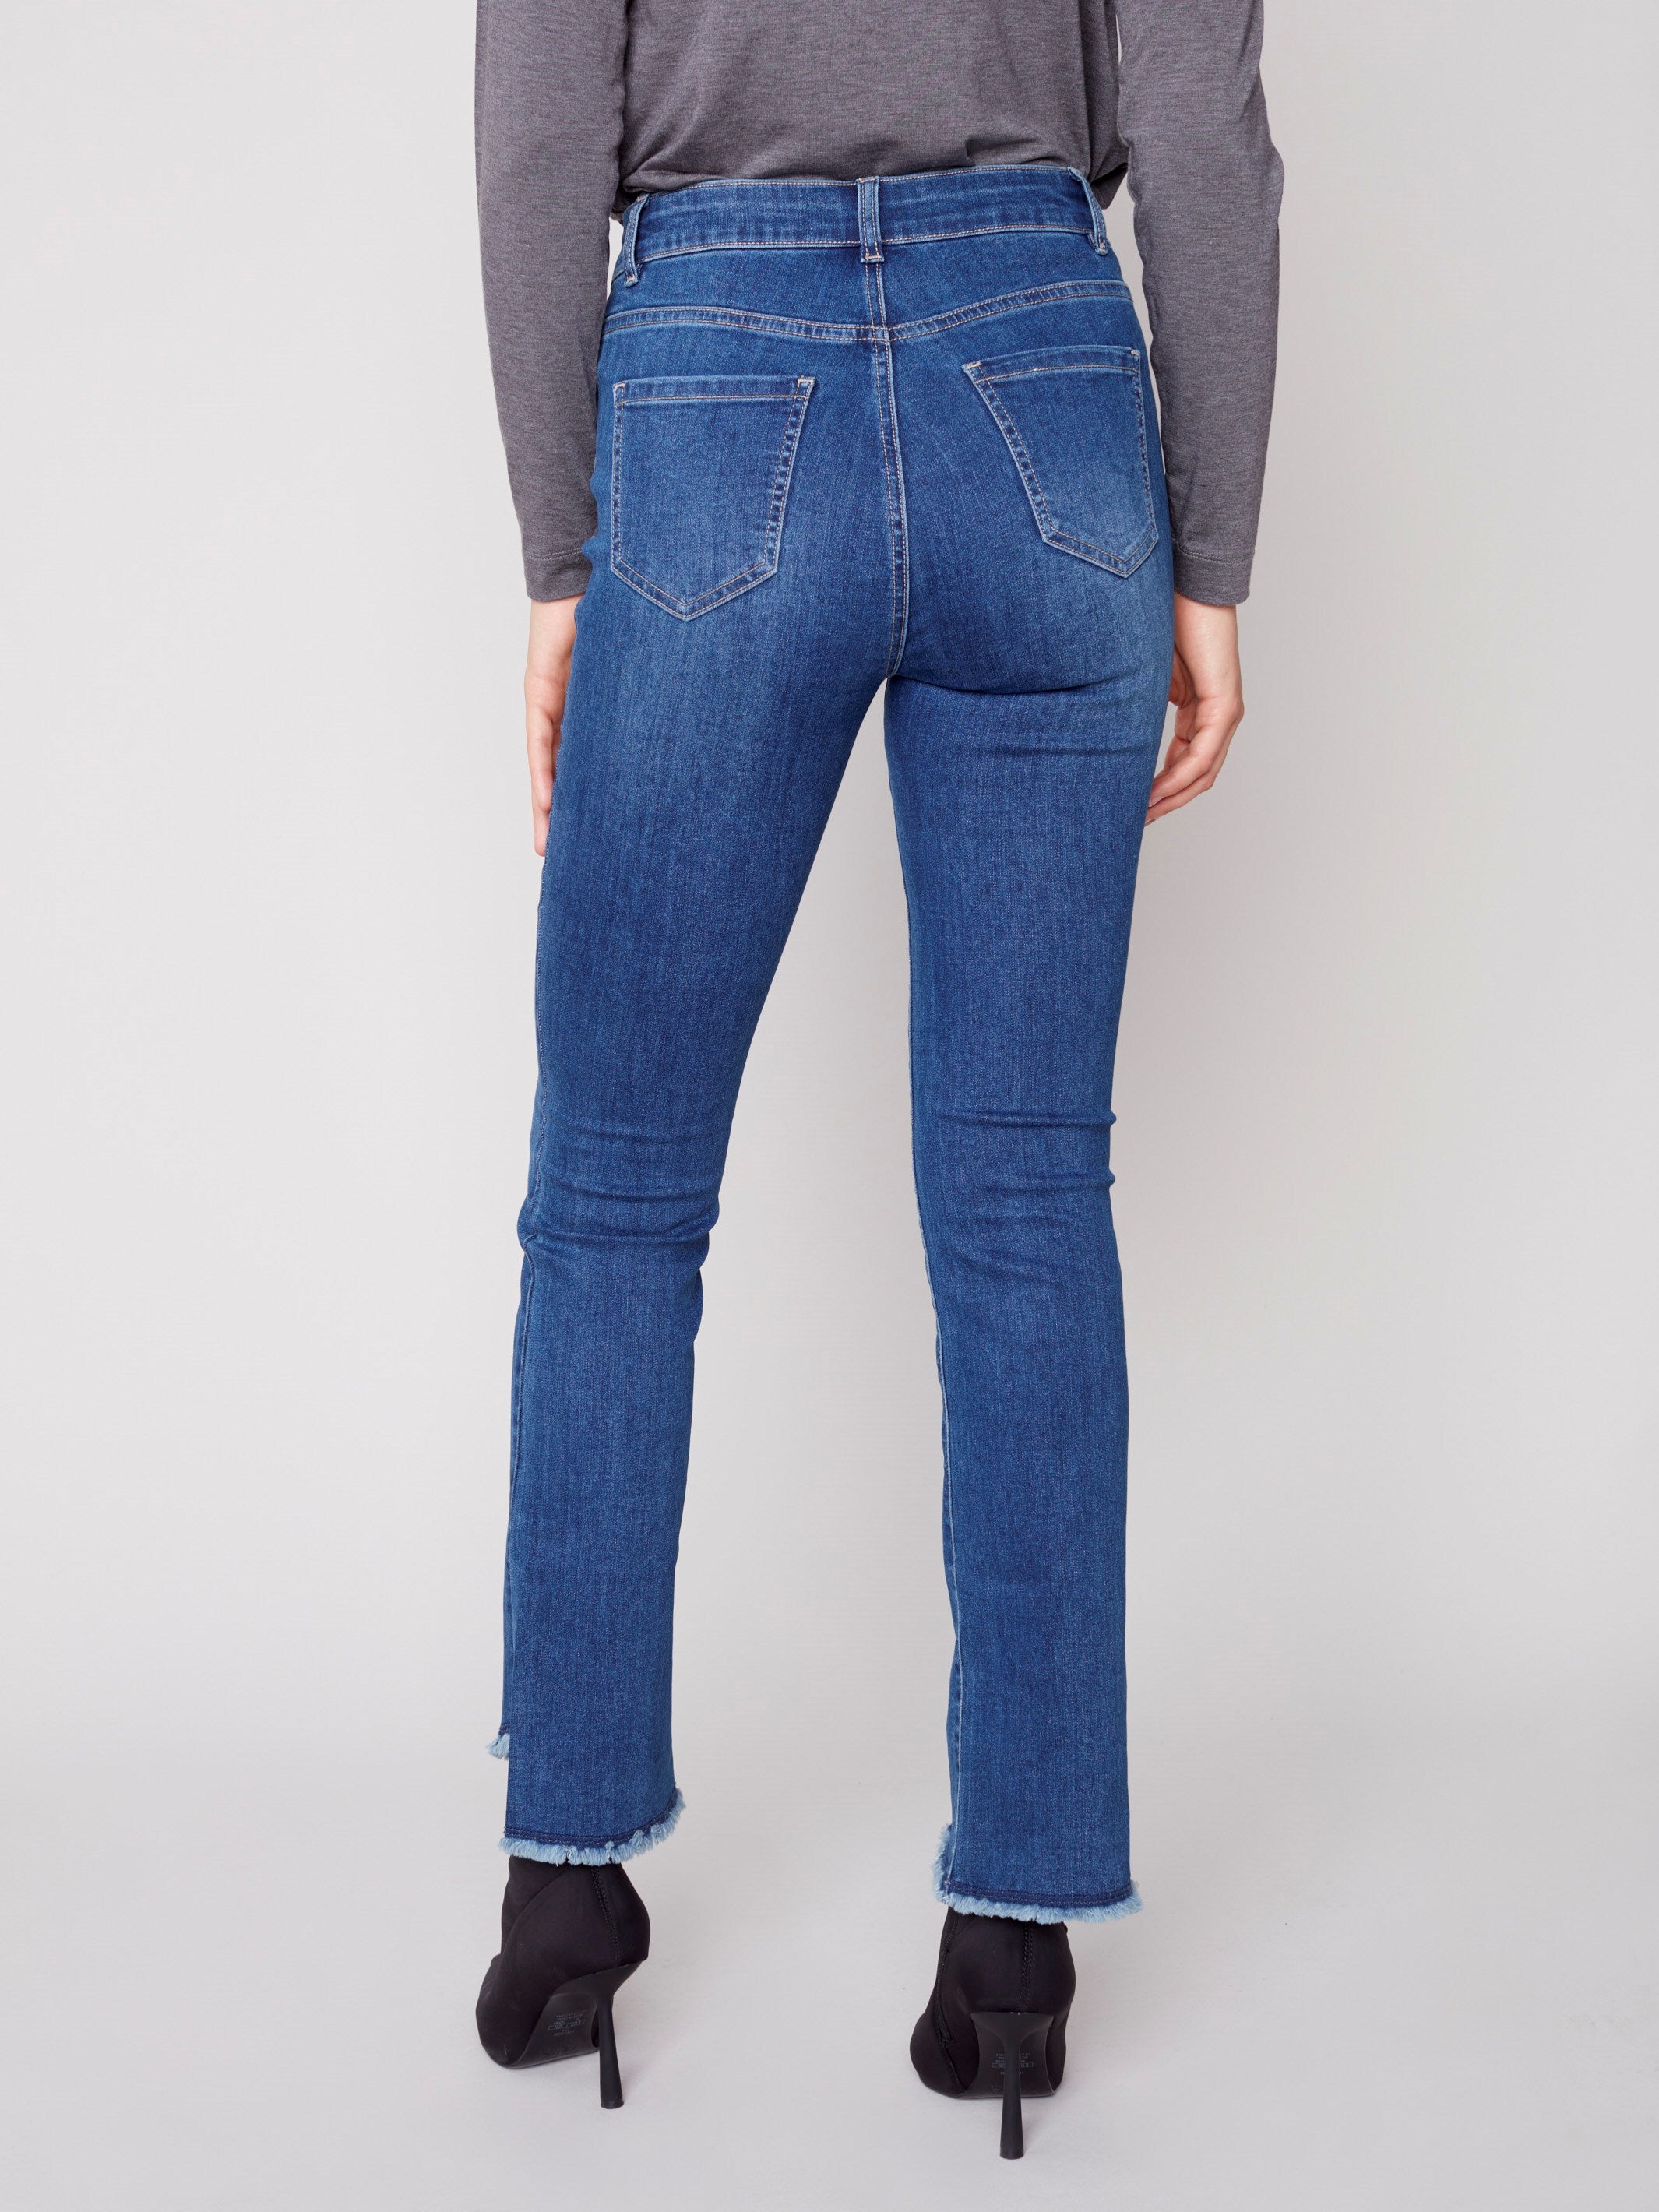 Bootcut Jeans with Asymmetrical Fringed Hem - Blue Jean